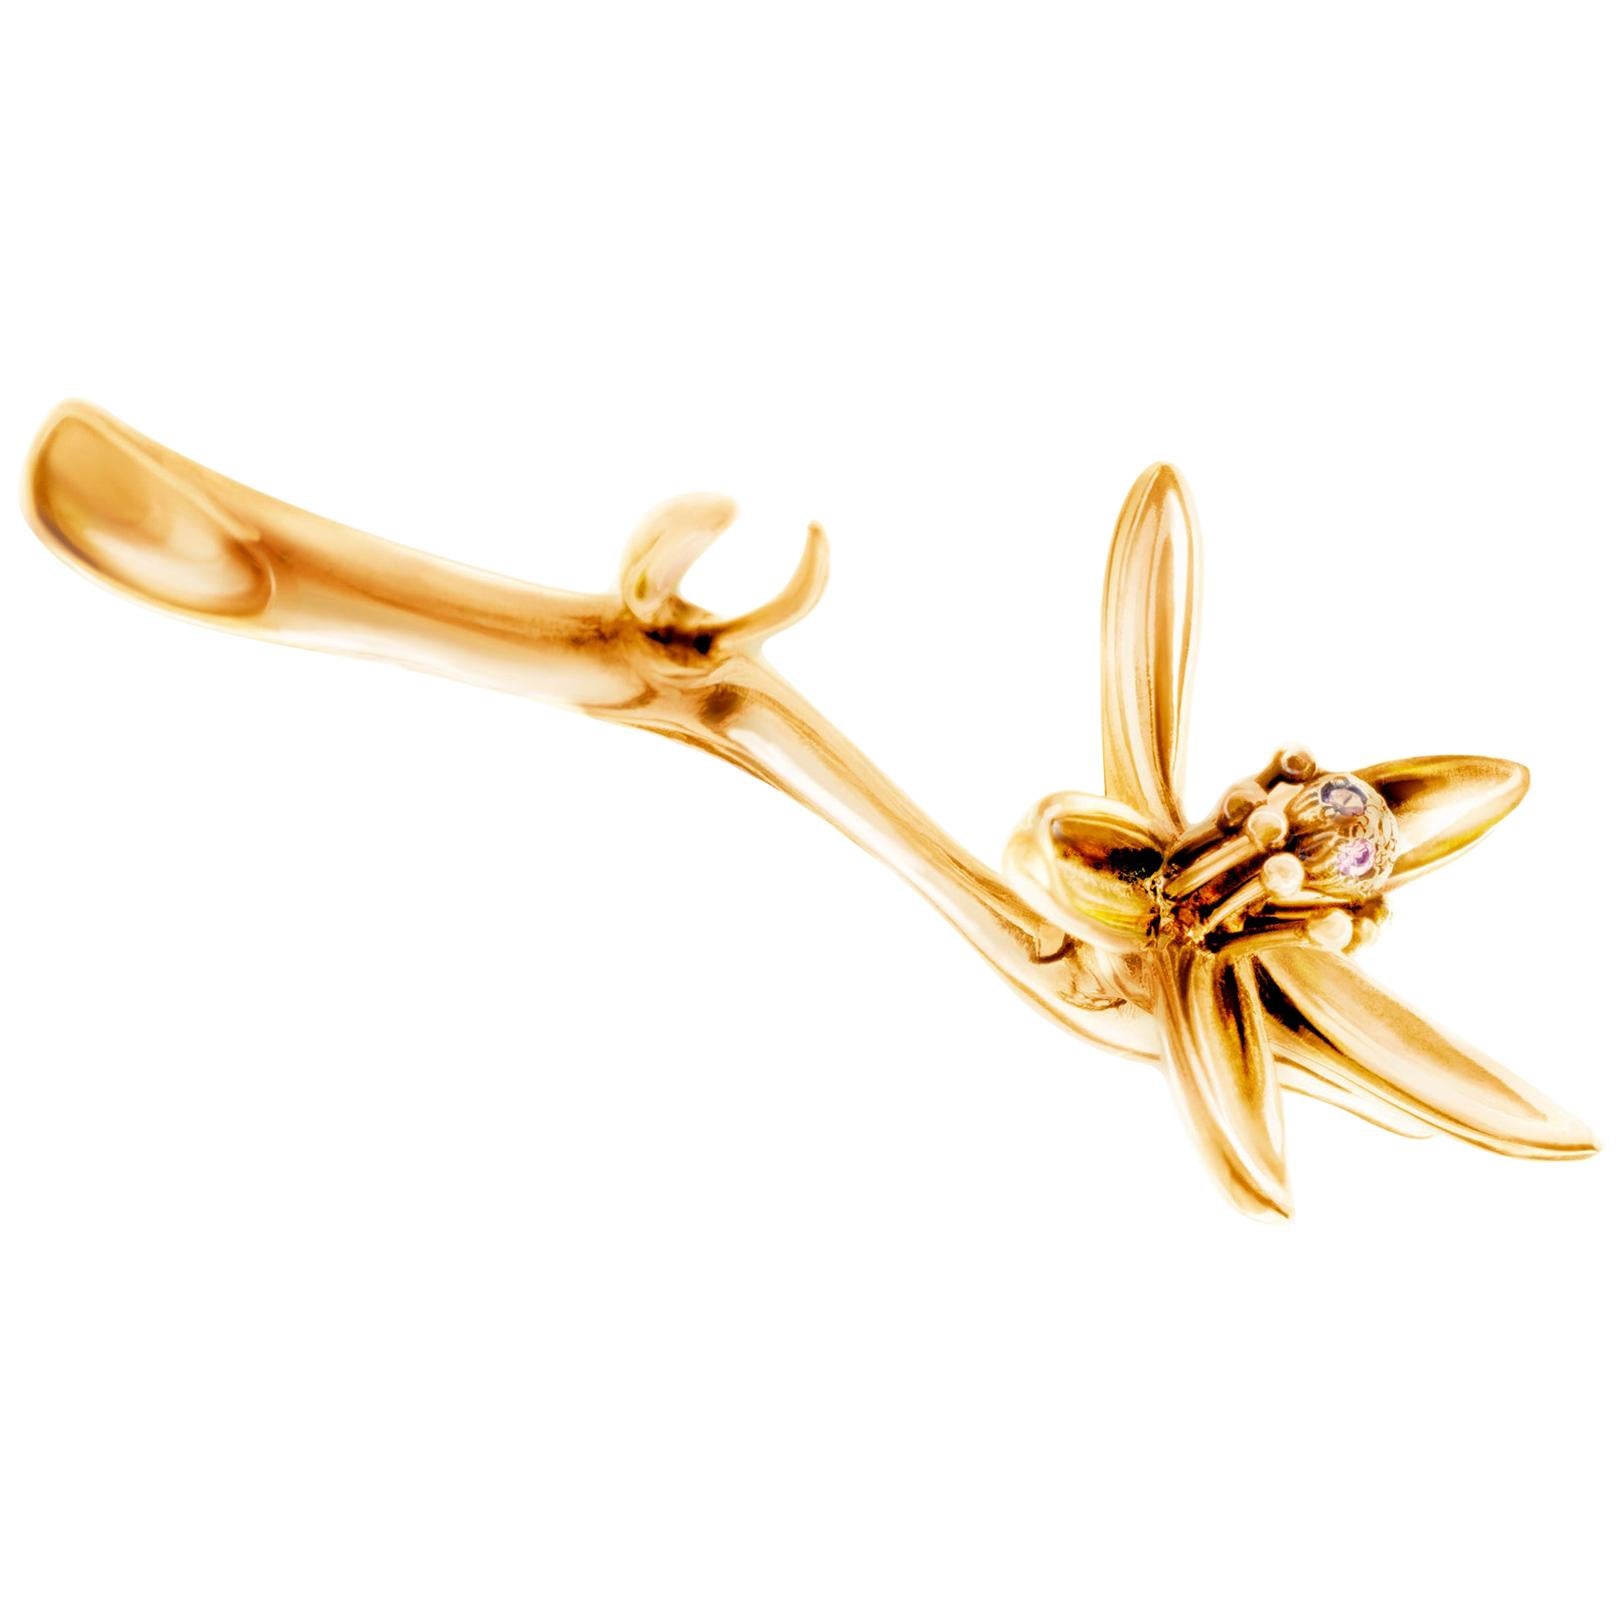 Featured in Vogue Rose Gold Artist Contemporary Sculptural Brooch For Sale